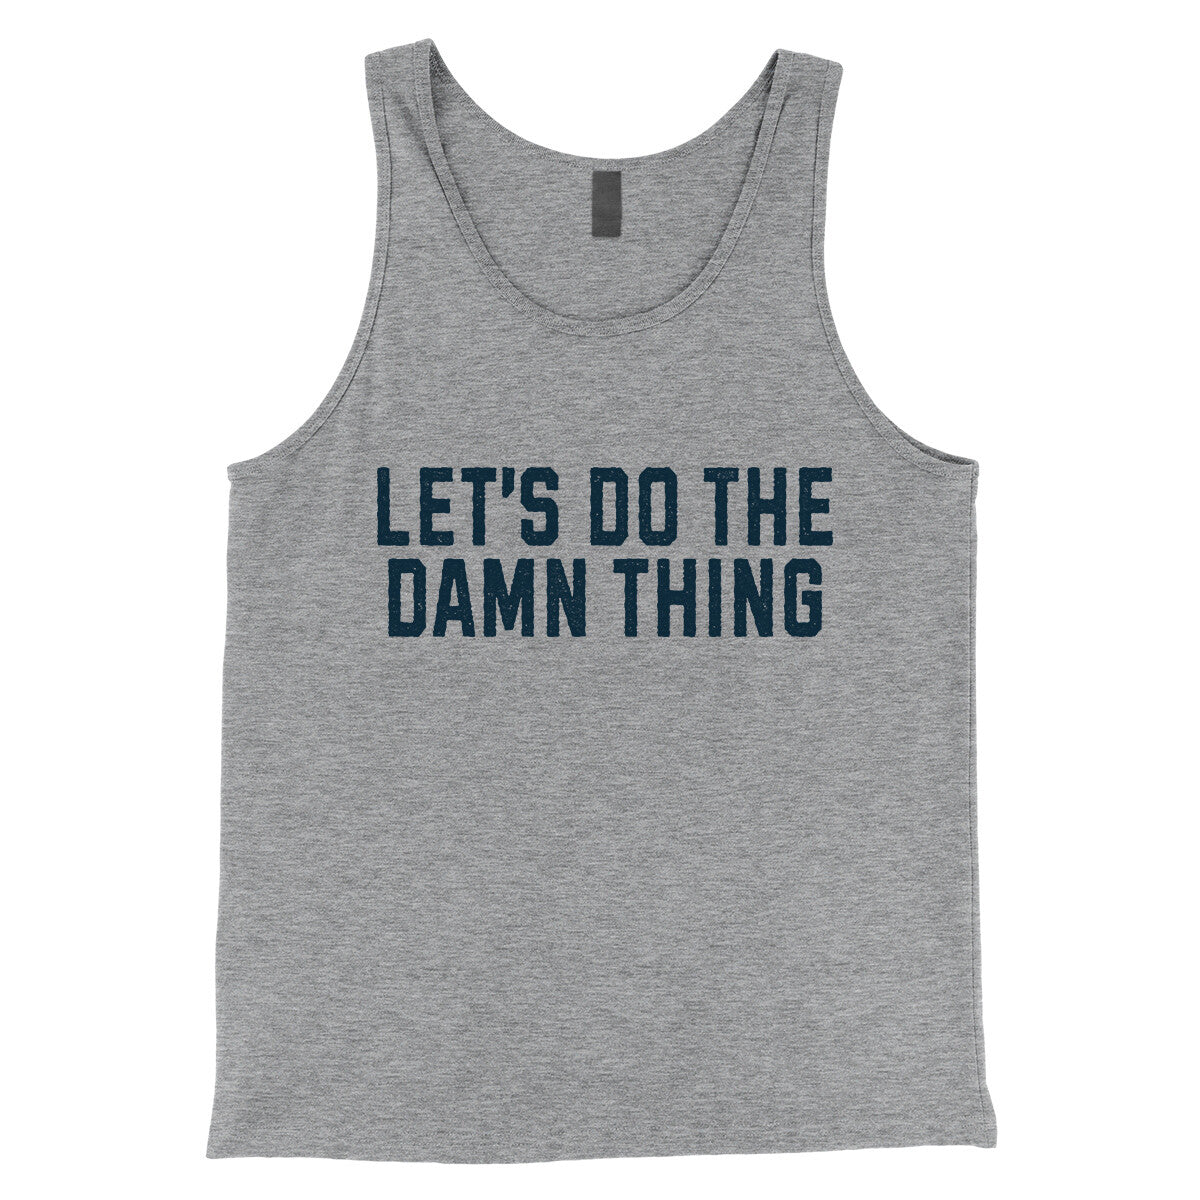 Let’s Do the Damn Thing in Athletic Heather Color